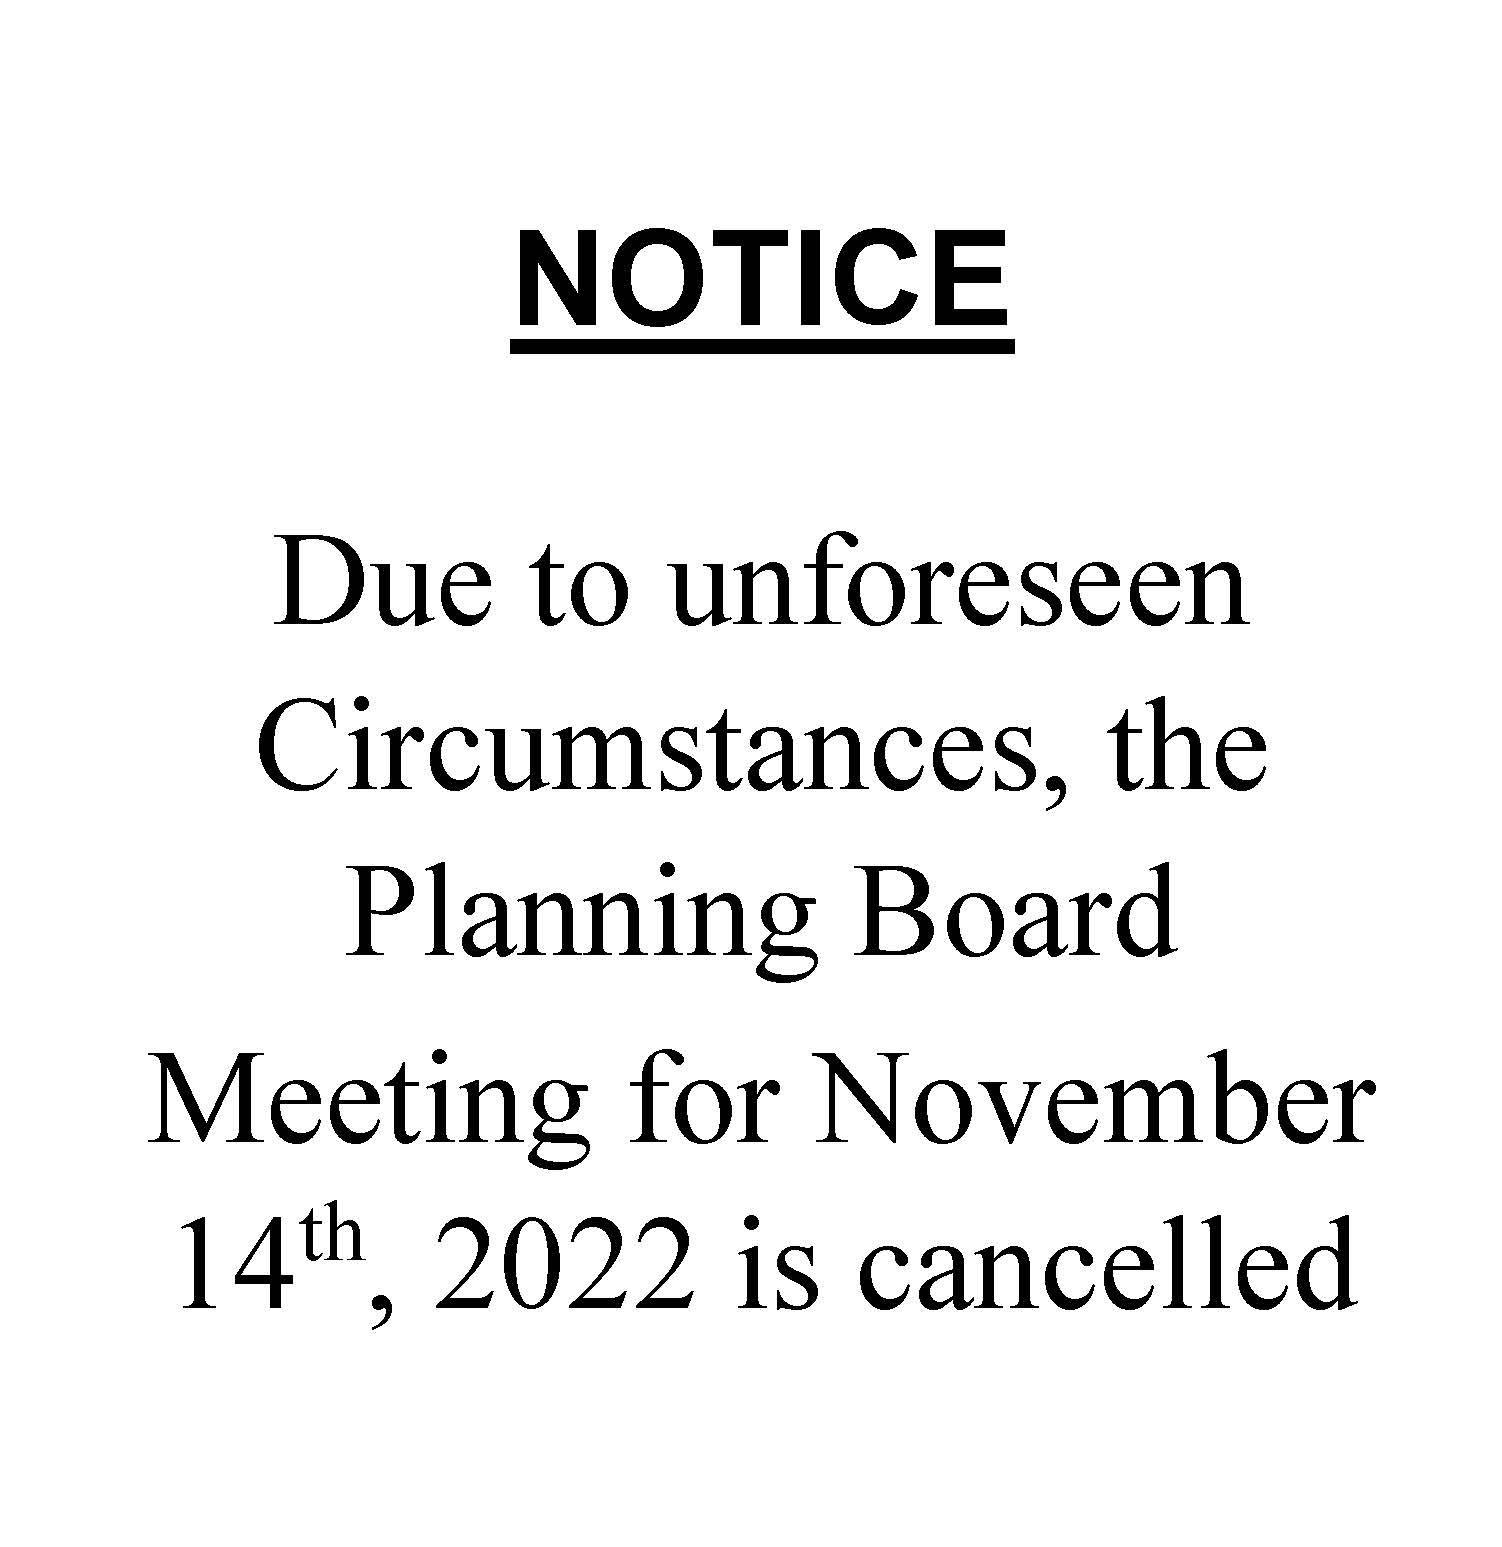 Meeting cancellation - Copy